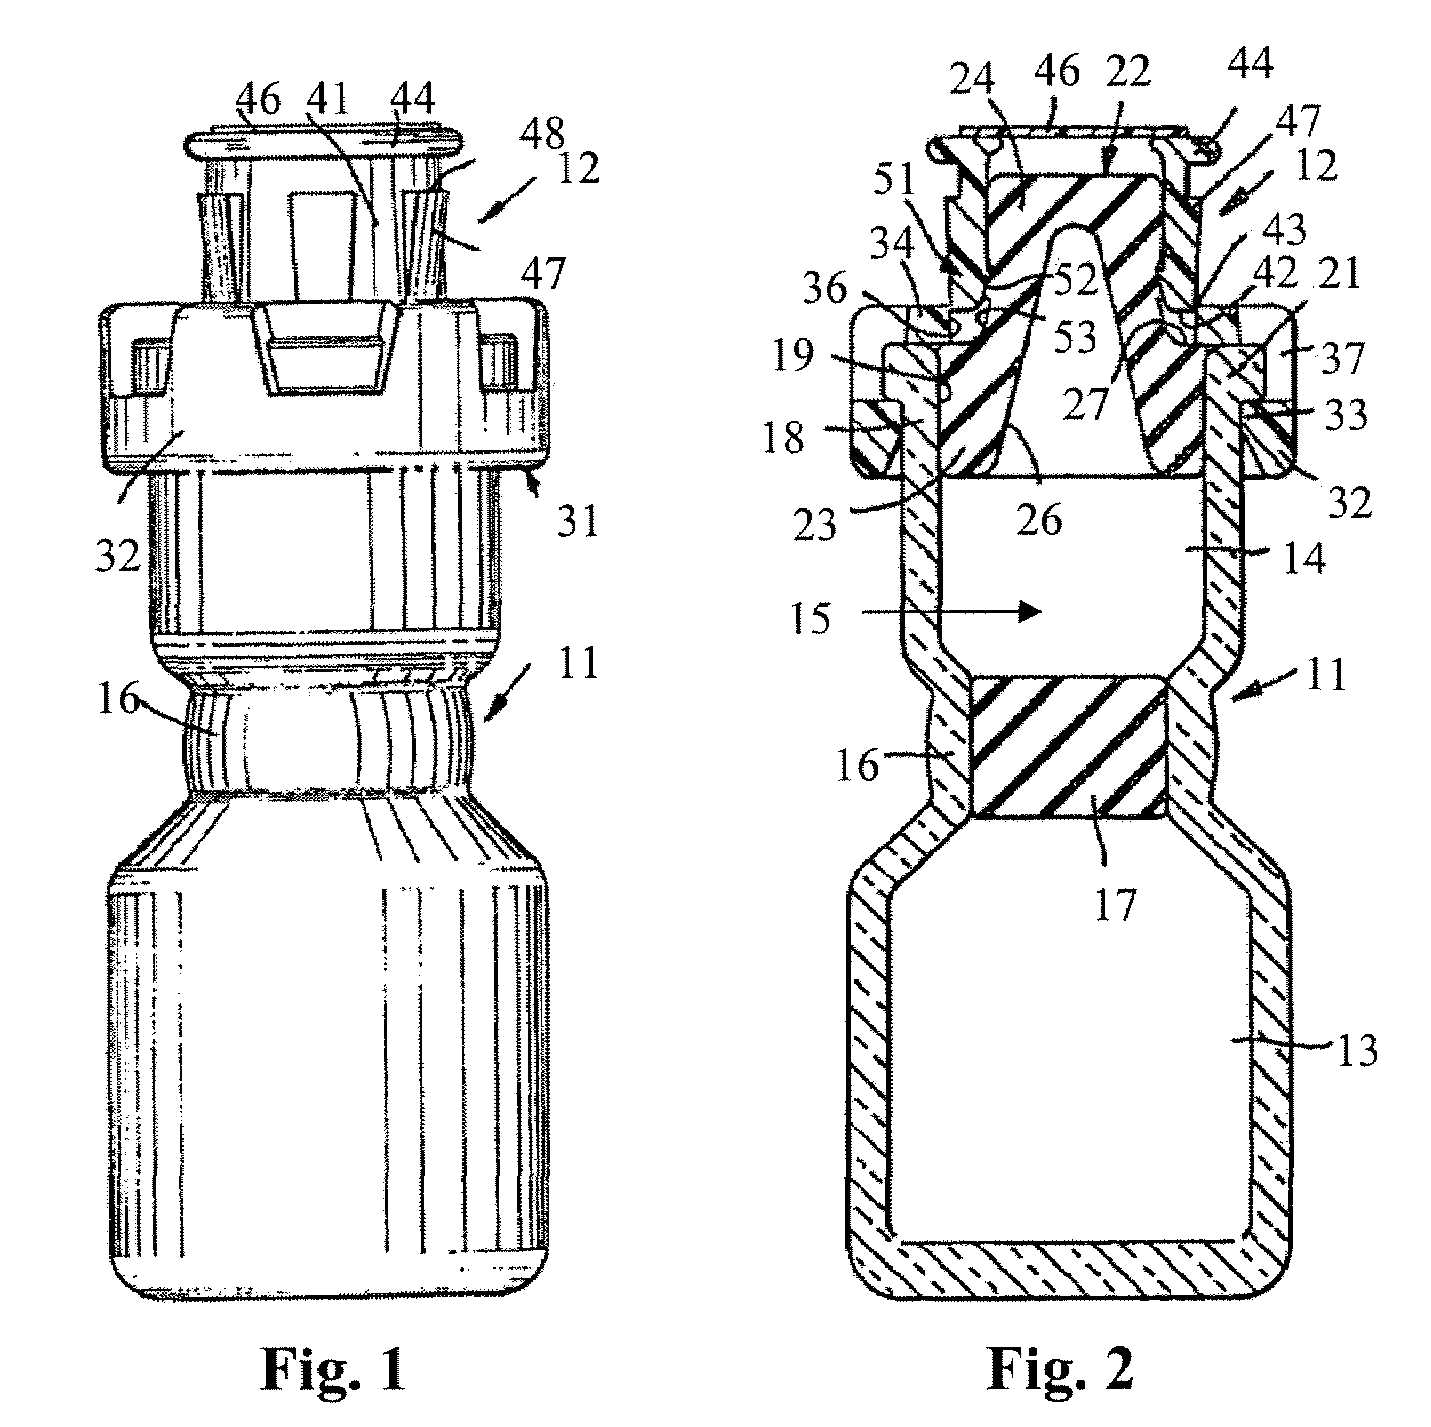 Injectable pharmaceutical suspension in a two-chamber vial